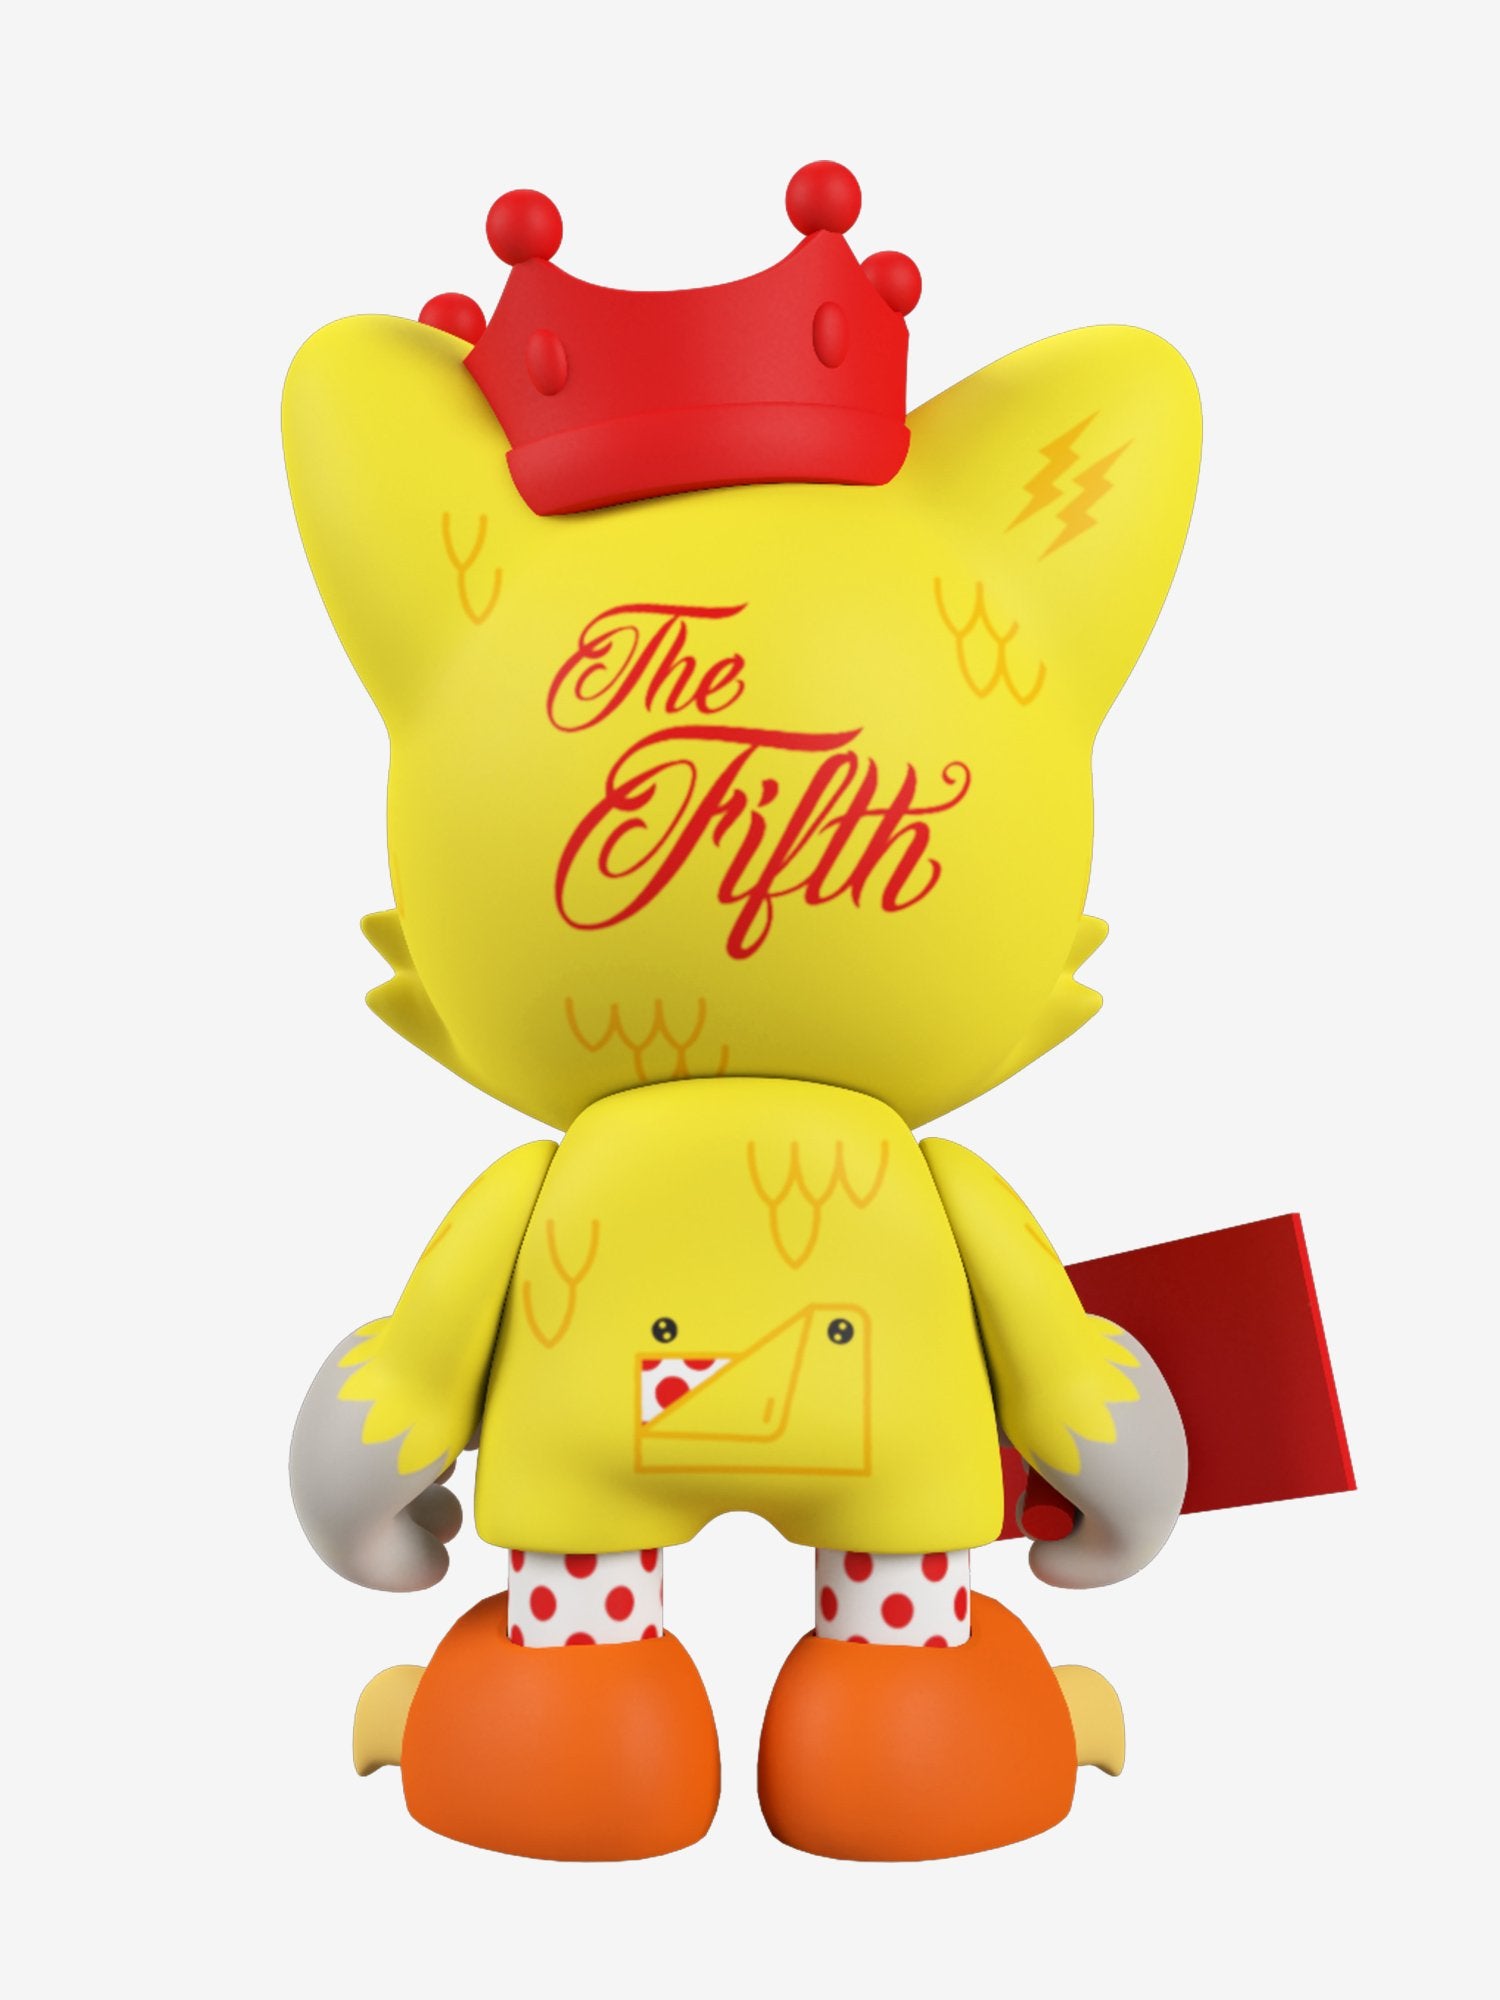 King Janky The Fifth Mini Figure by Superplastic